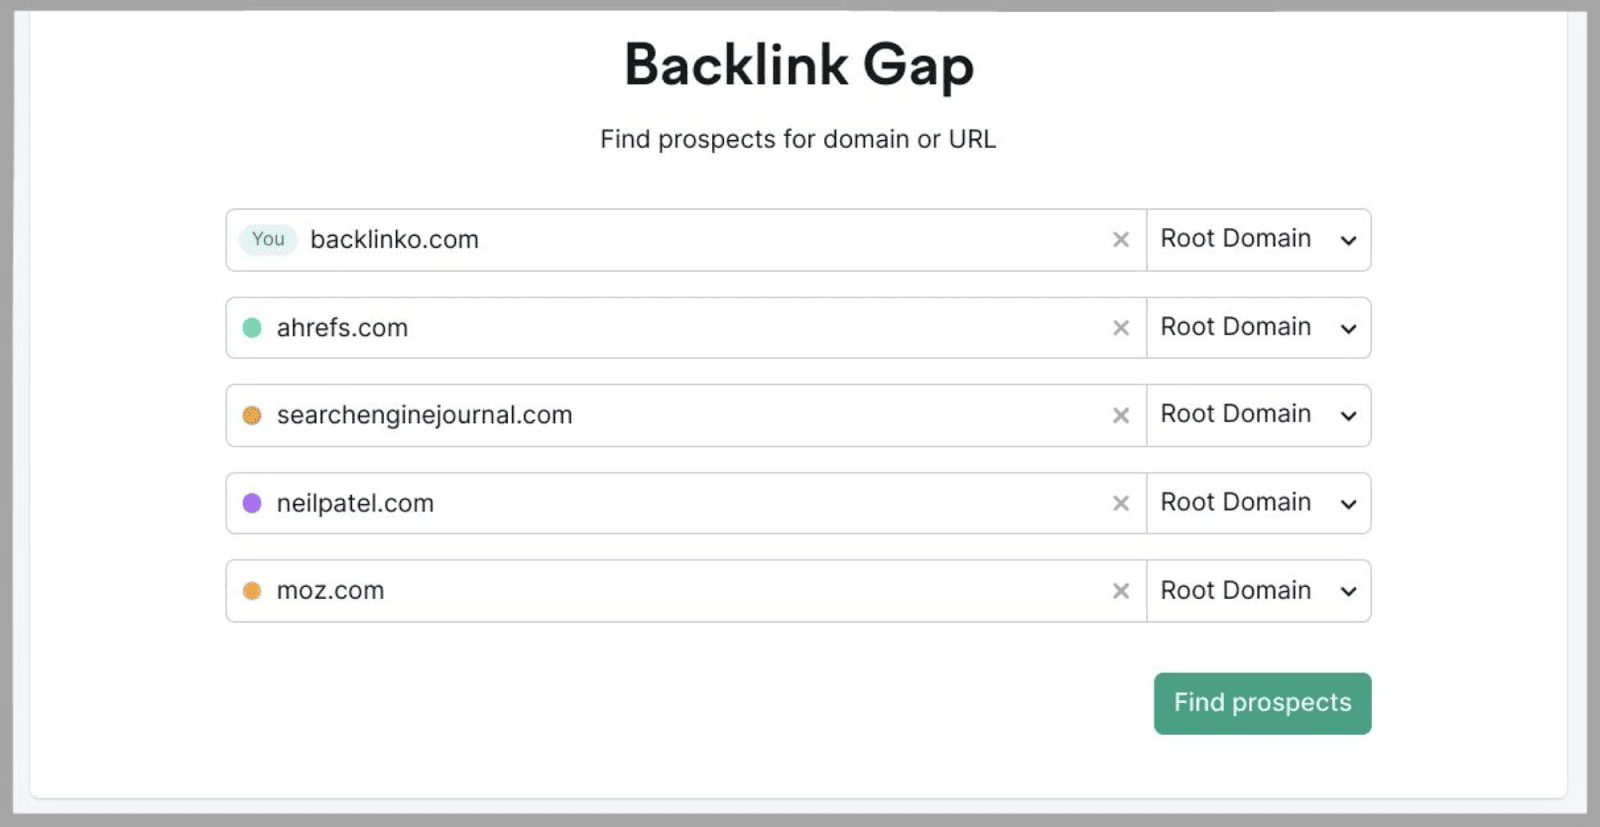 Find any backlink gaps compared to competitors